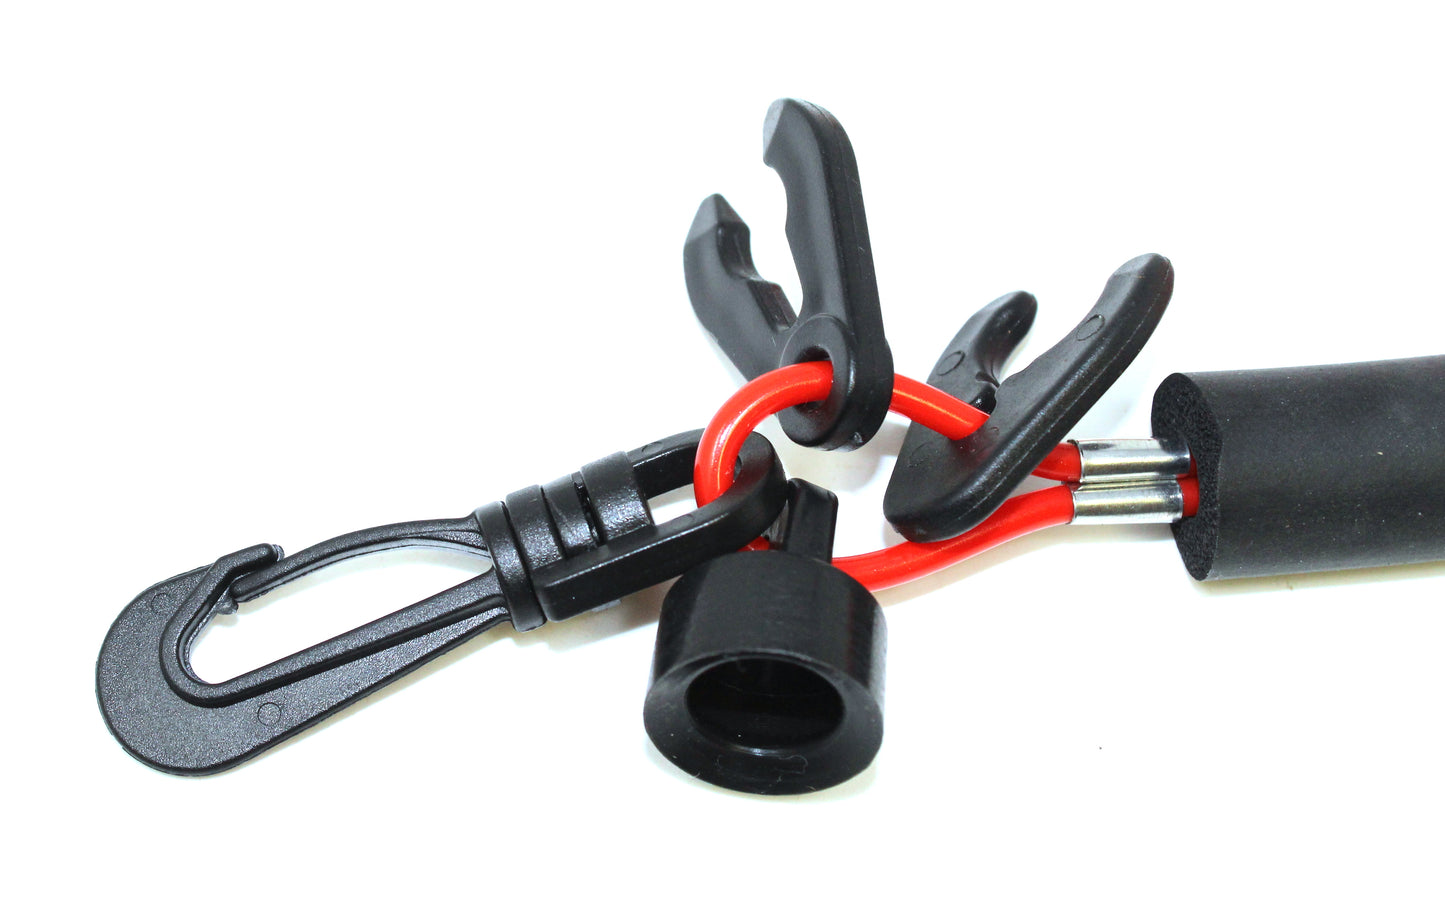 Aftermarket Sea-Doo Non-DESS Floating Safety Lanyard / Ignition Cap Key Stop Switch XP GTS GTS SP SPX part # 278001431